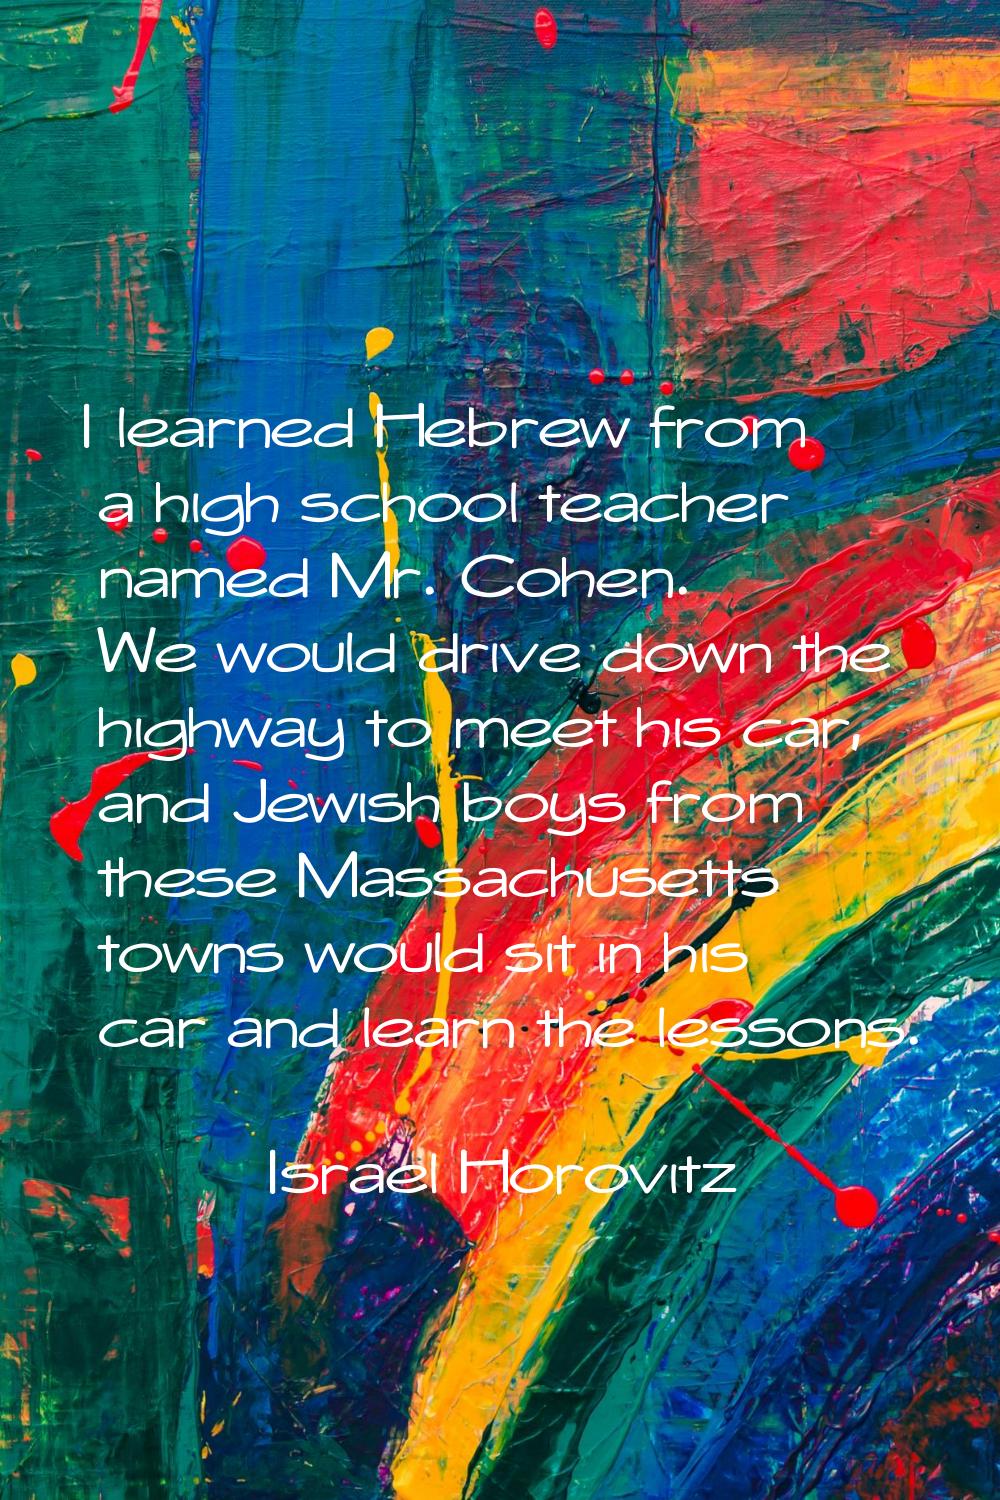 I learned Hebrew from a high school teacher named Mr. Cohen. We would drive down the highway to mee